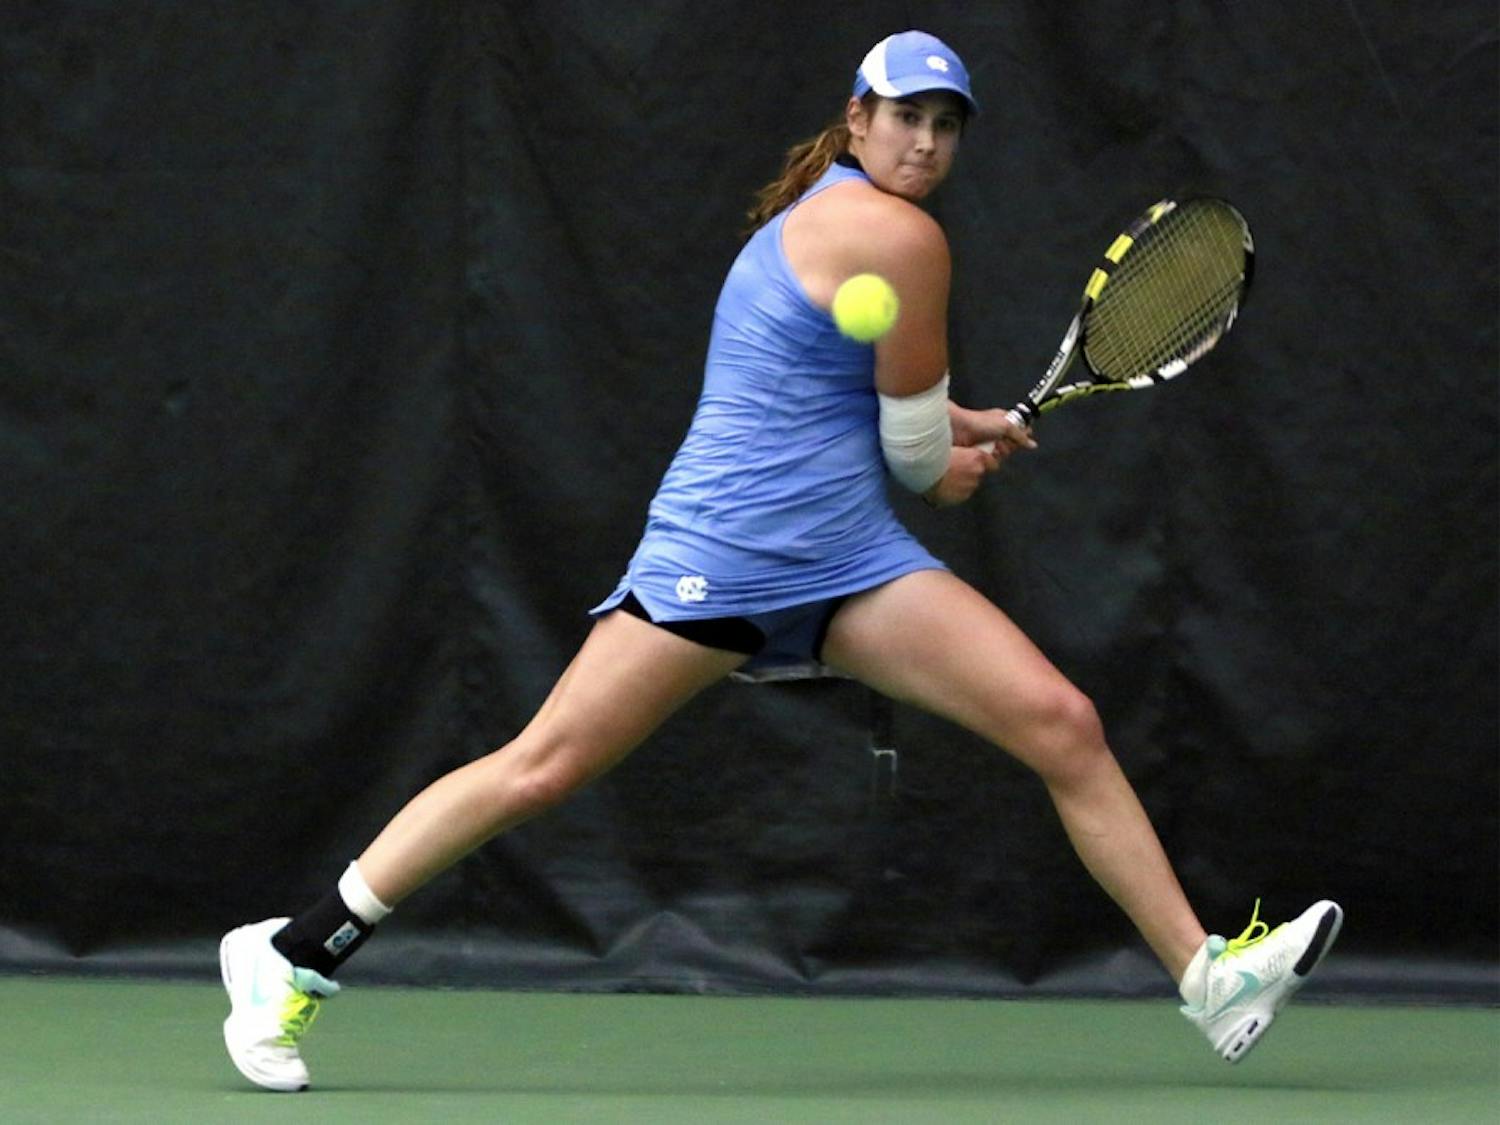 Sophomore Hayley Carter is second on the North Carolina women’s tennis team in singles wins.